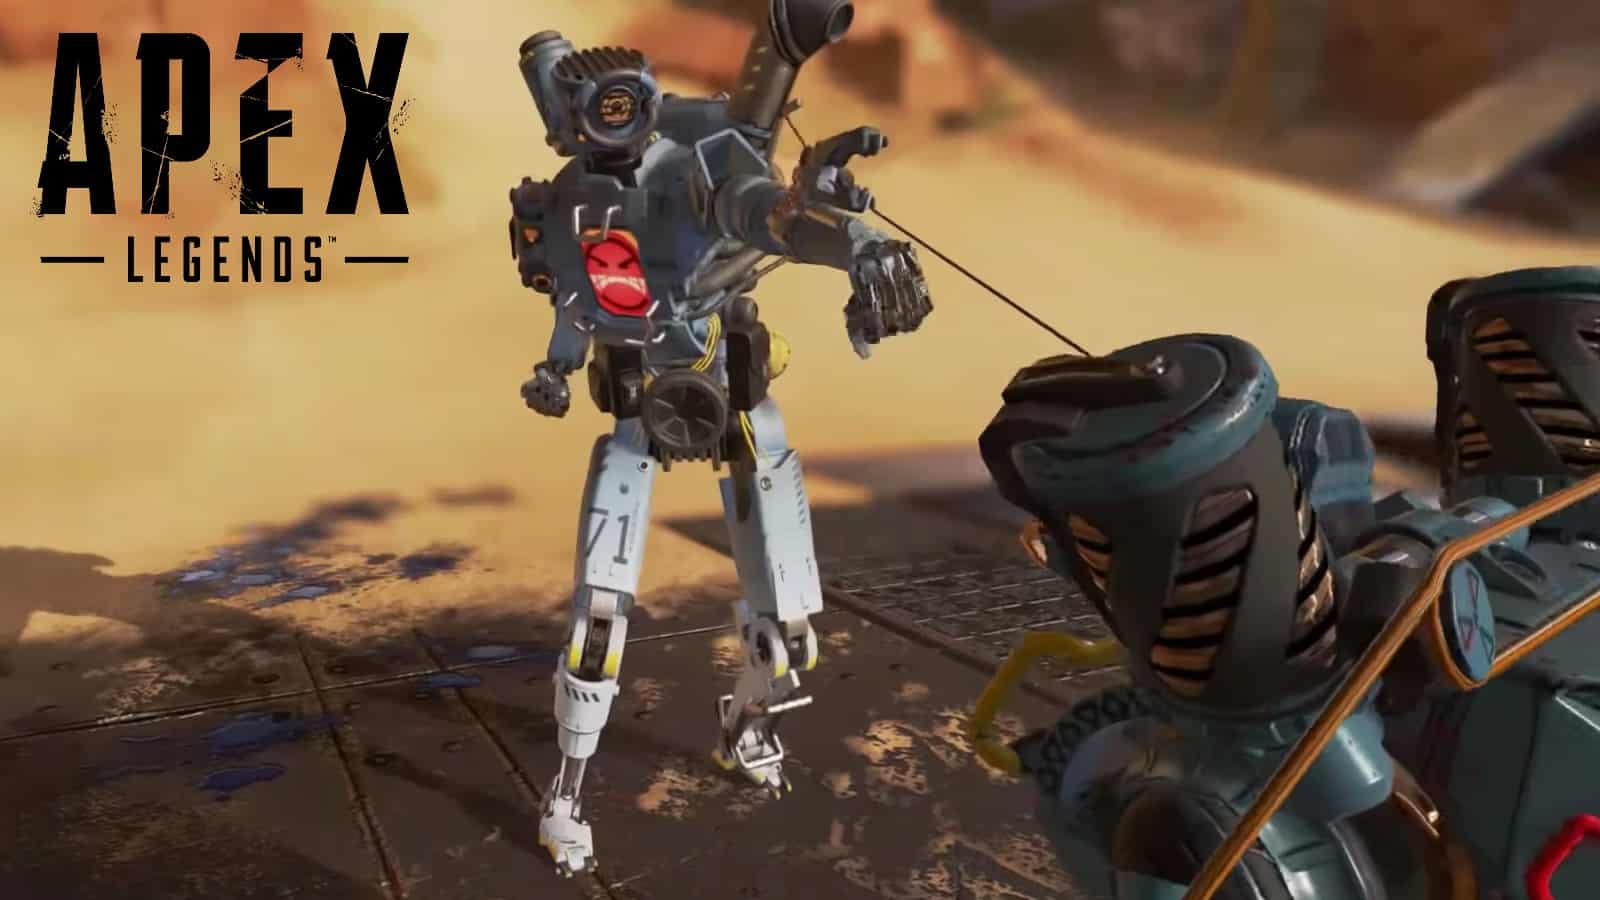 Pathfinder performing a finishing move in Apex Legends